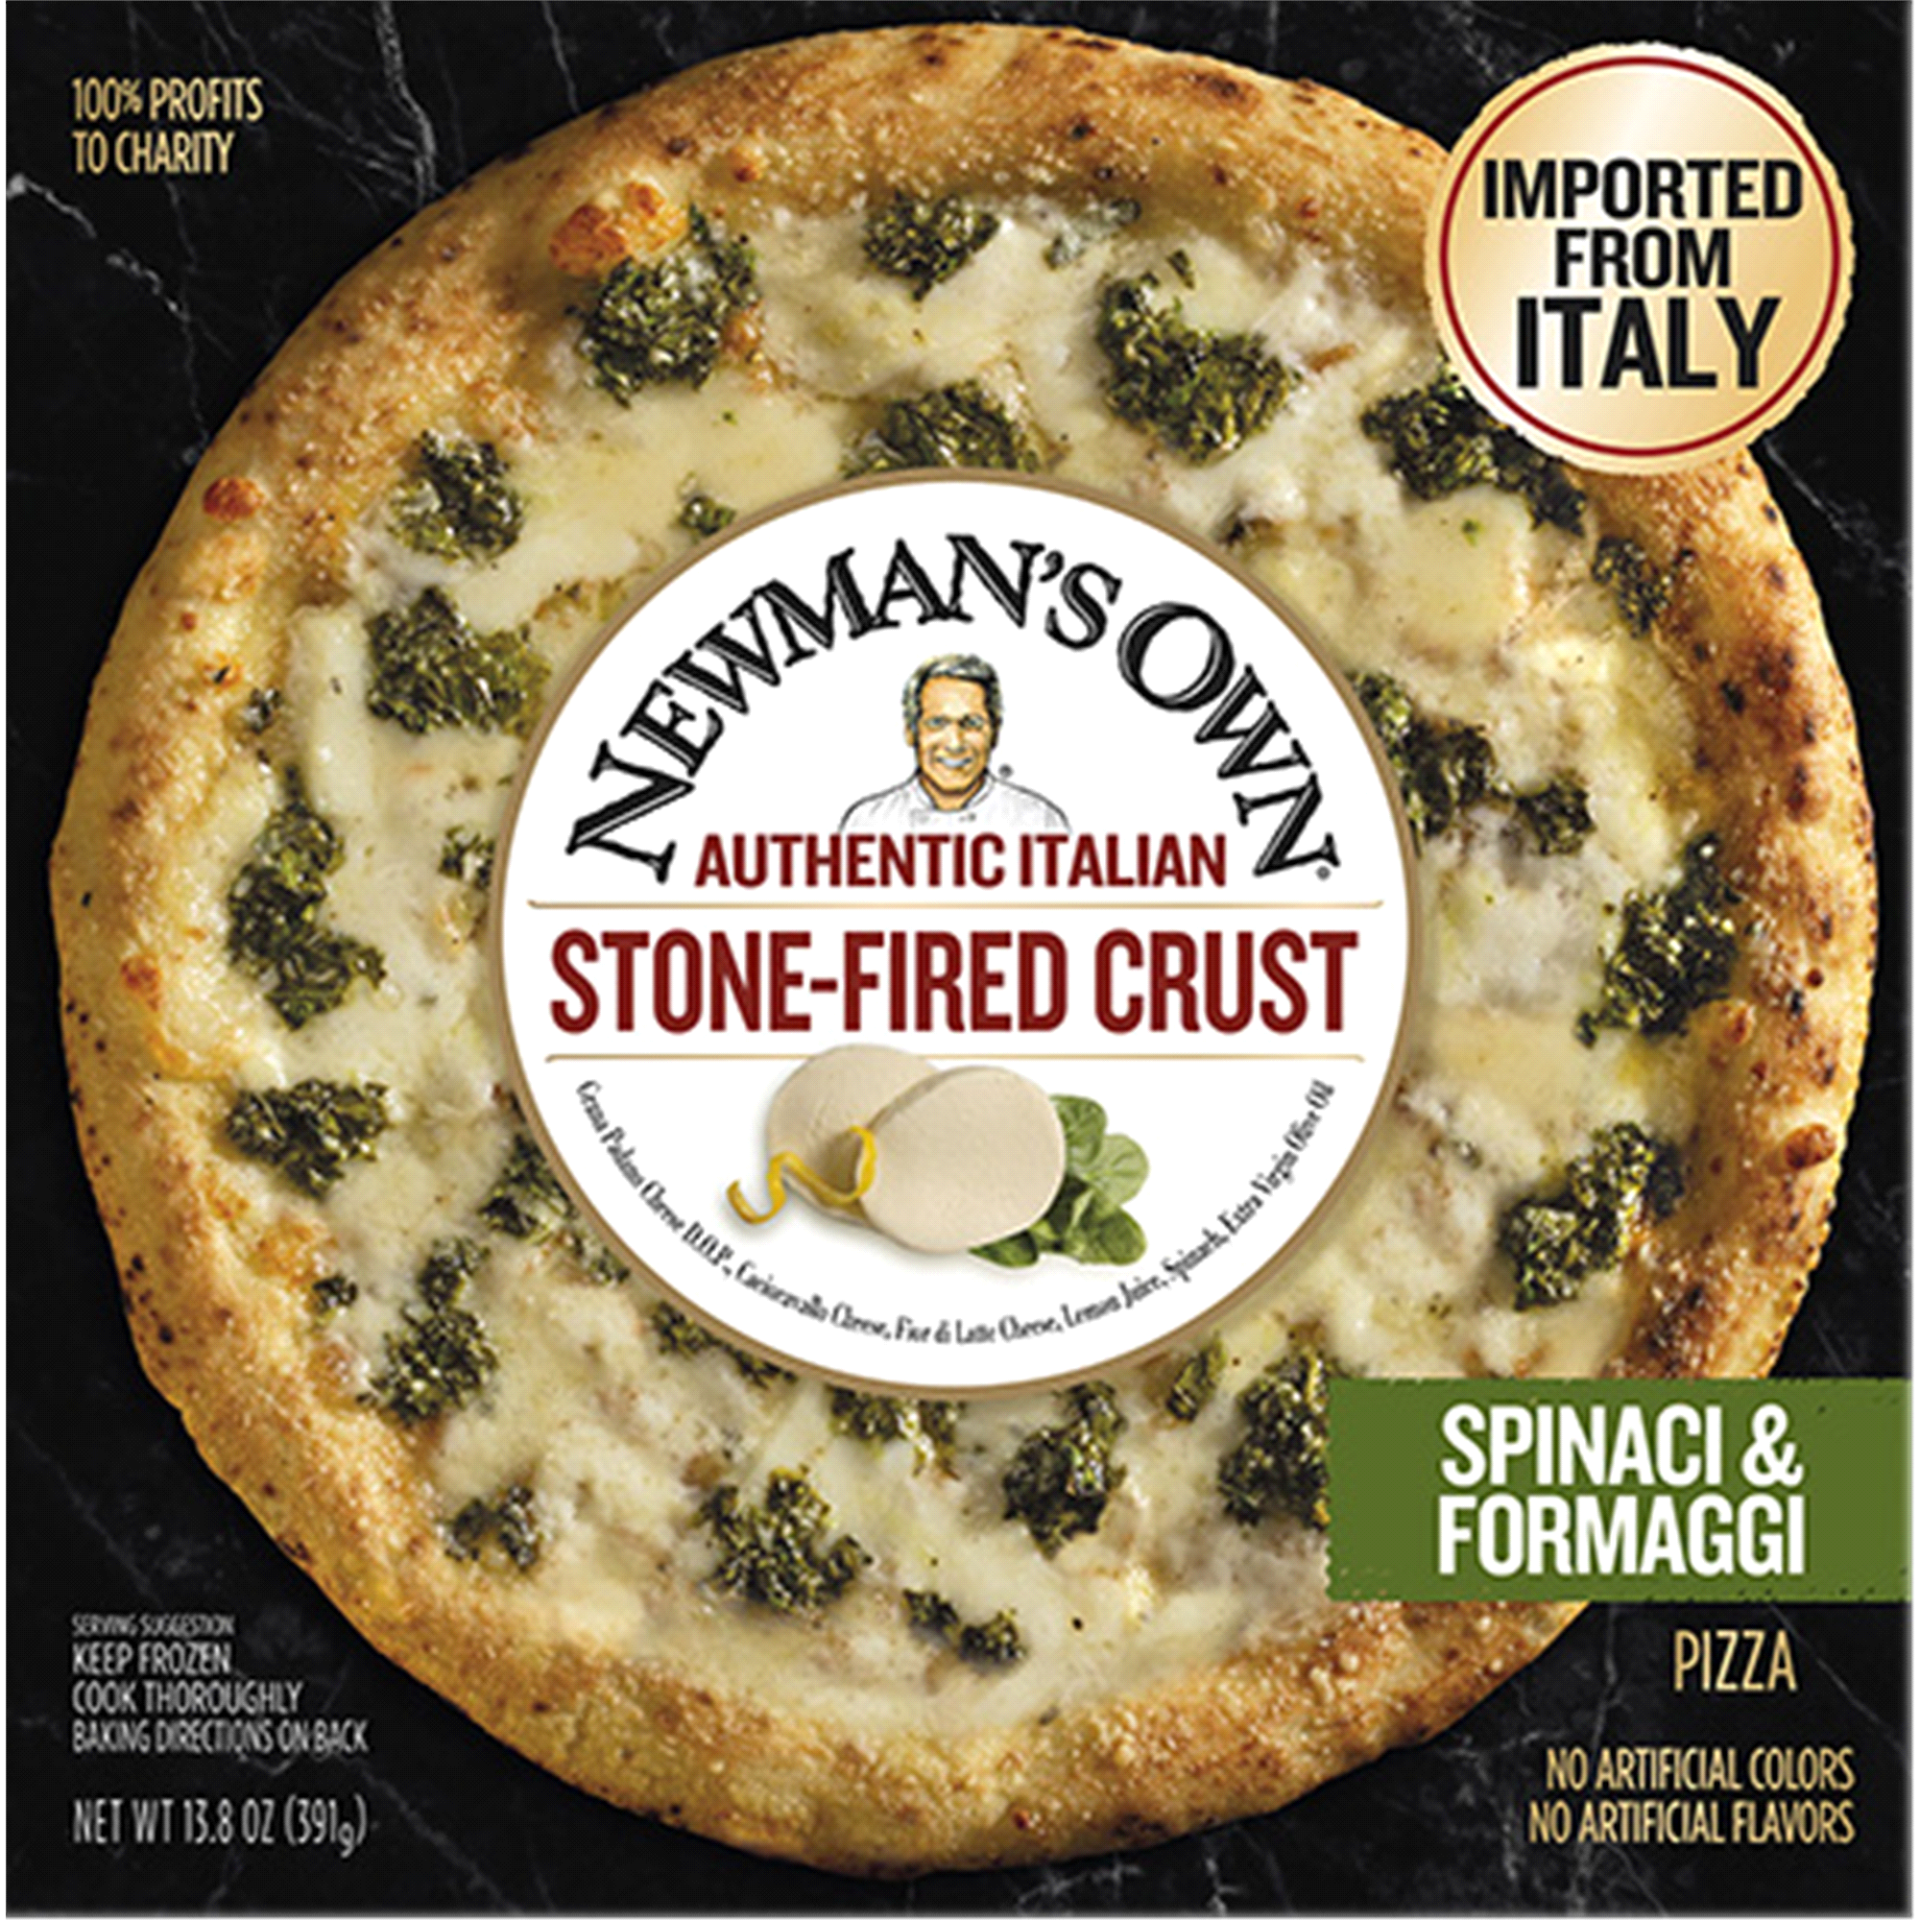 slide 1 of 2, Newman's Own Authentic Italian Stone-Fired Crust Spinach & Formaggi Pizza 13.8 oz, 13.8 oz